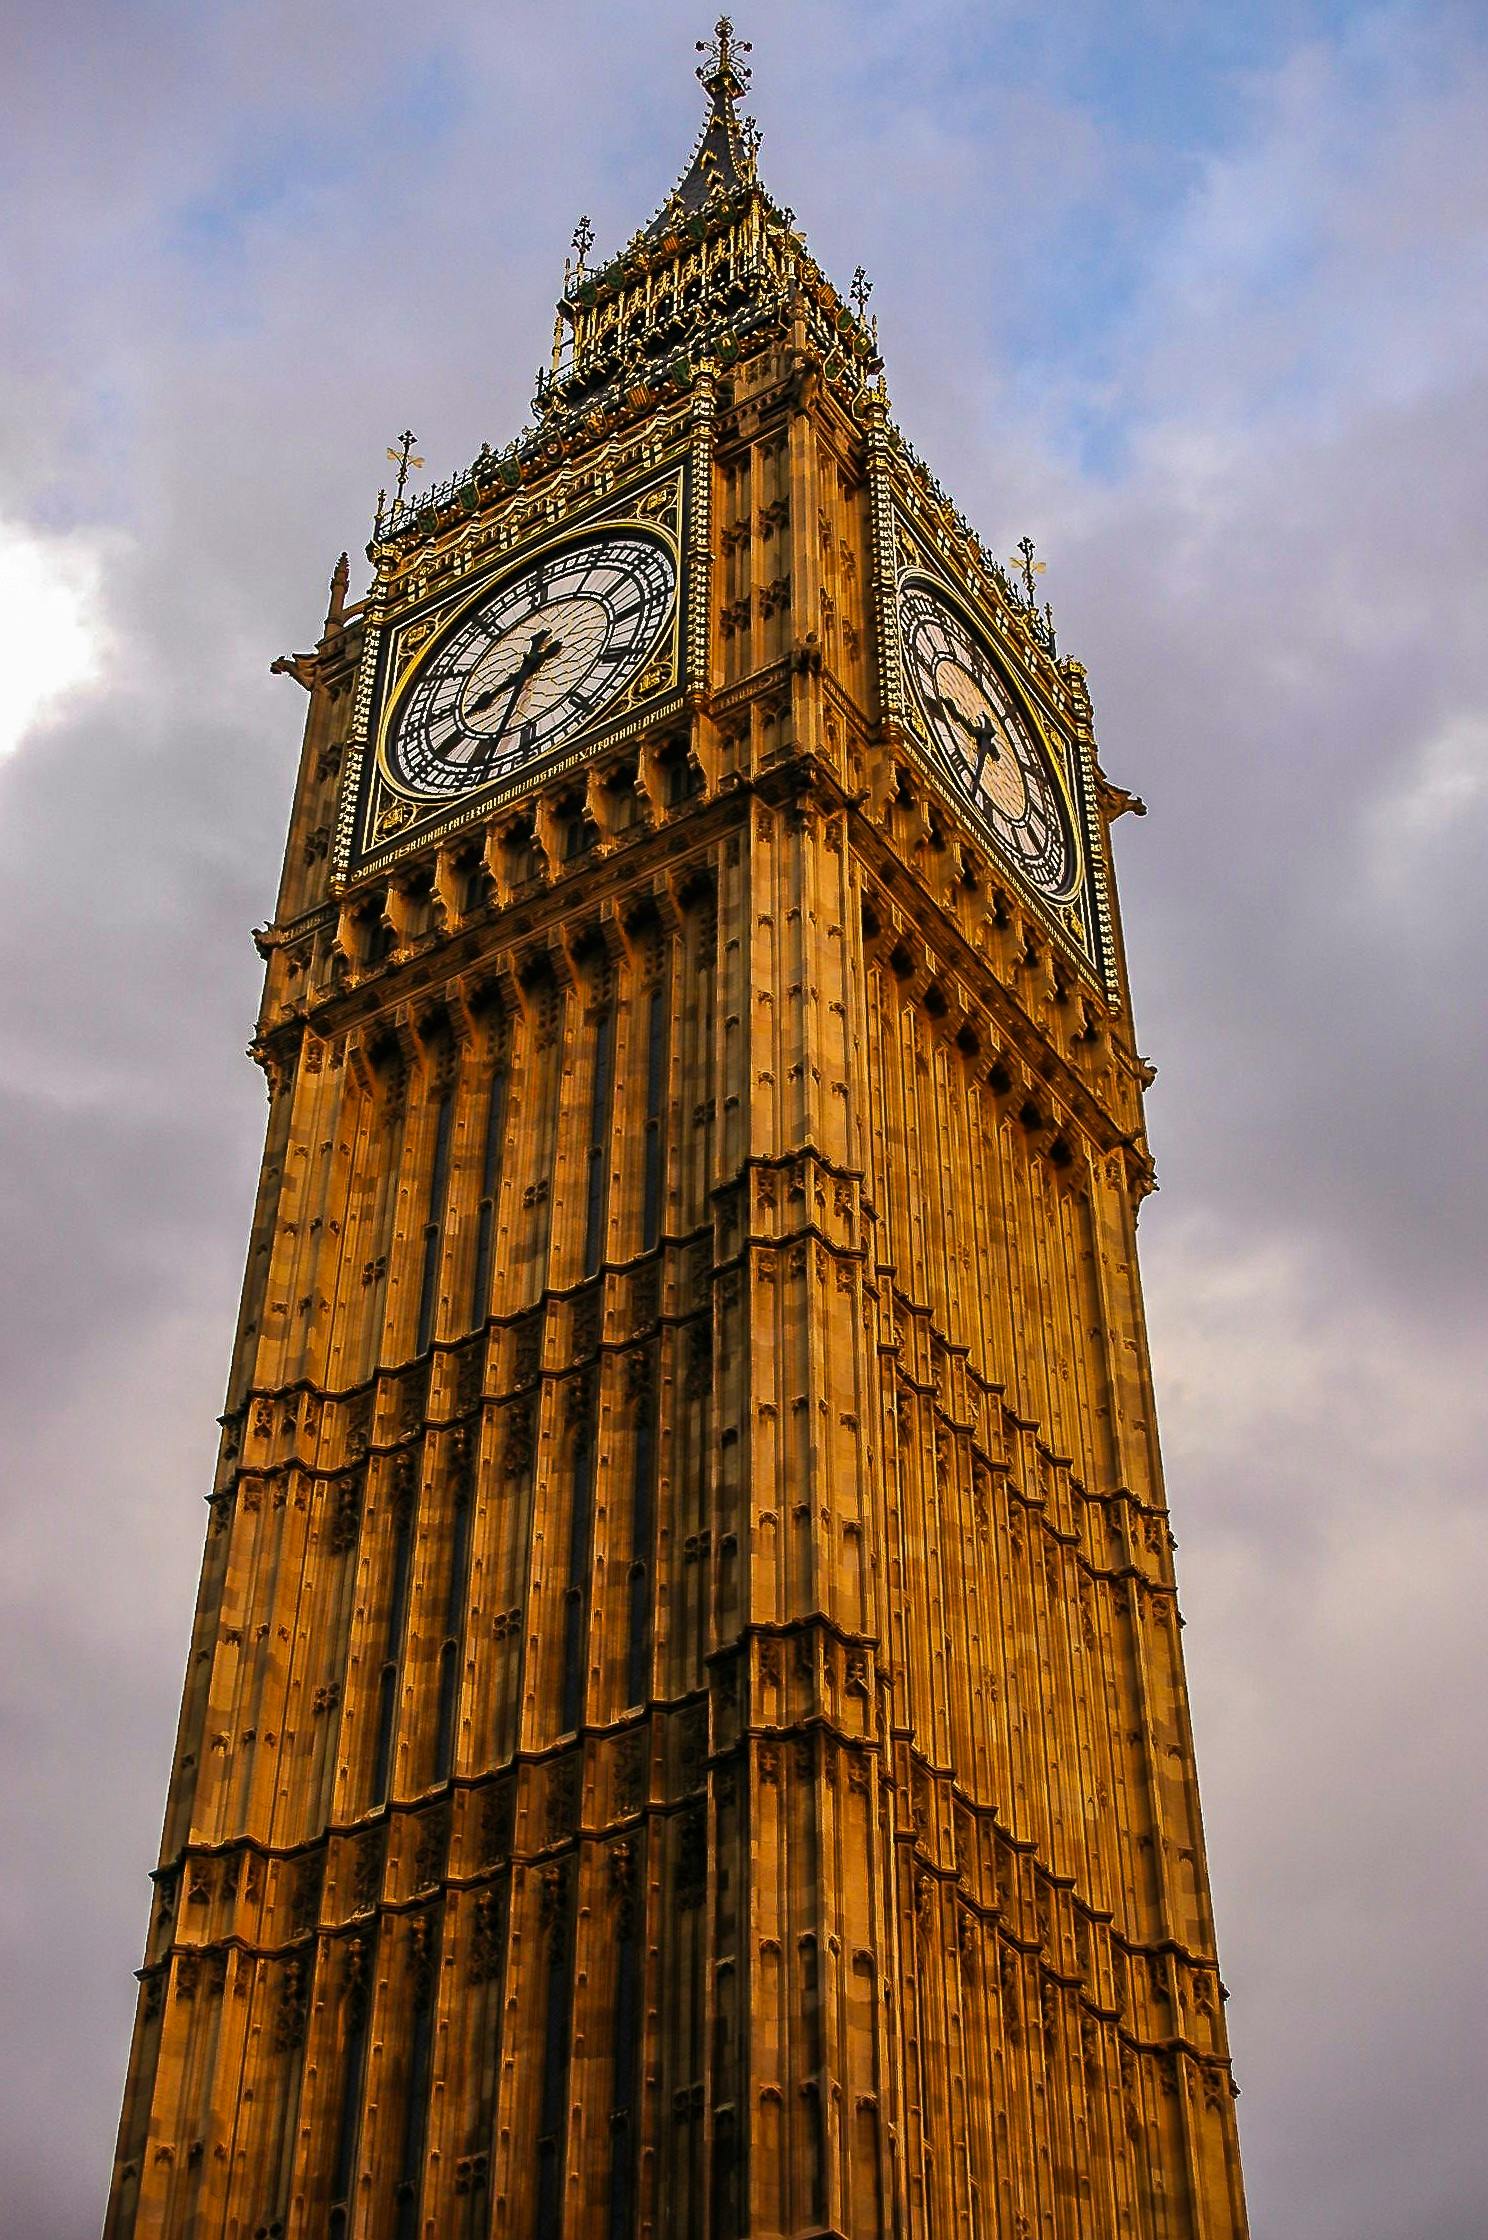 the big ben clock tower towering over the city of london, by David Simpson, watch photo